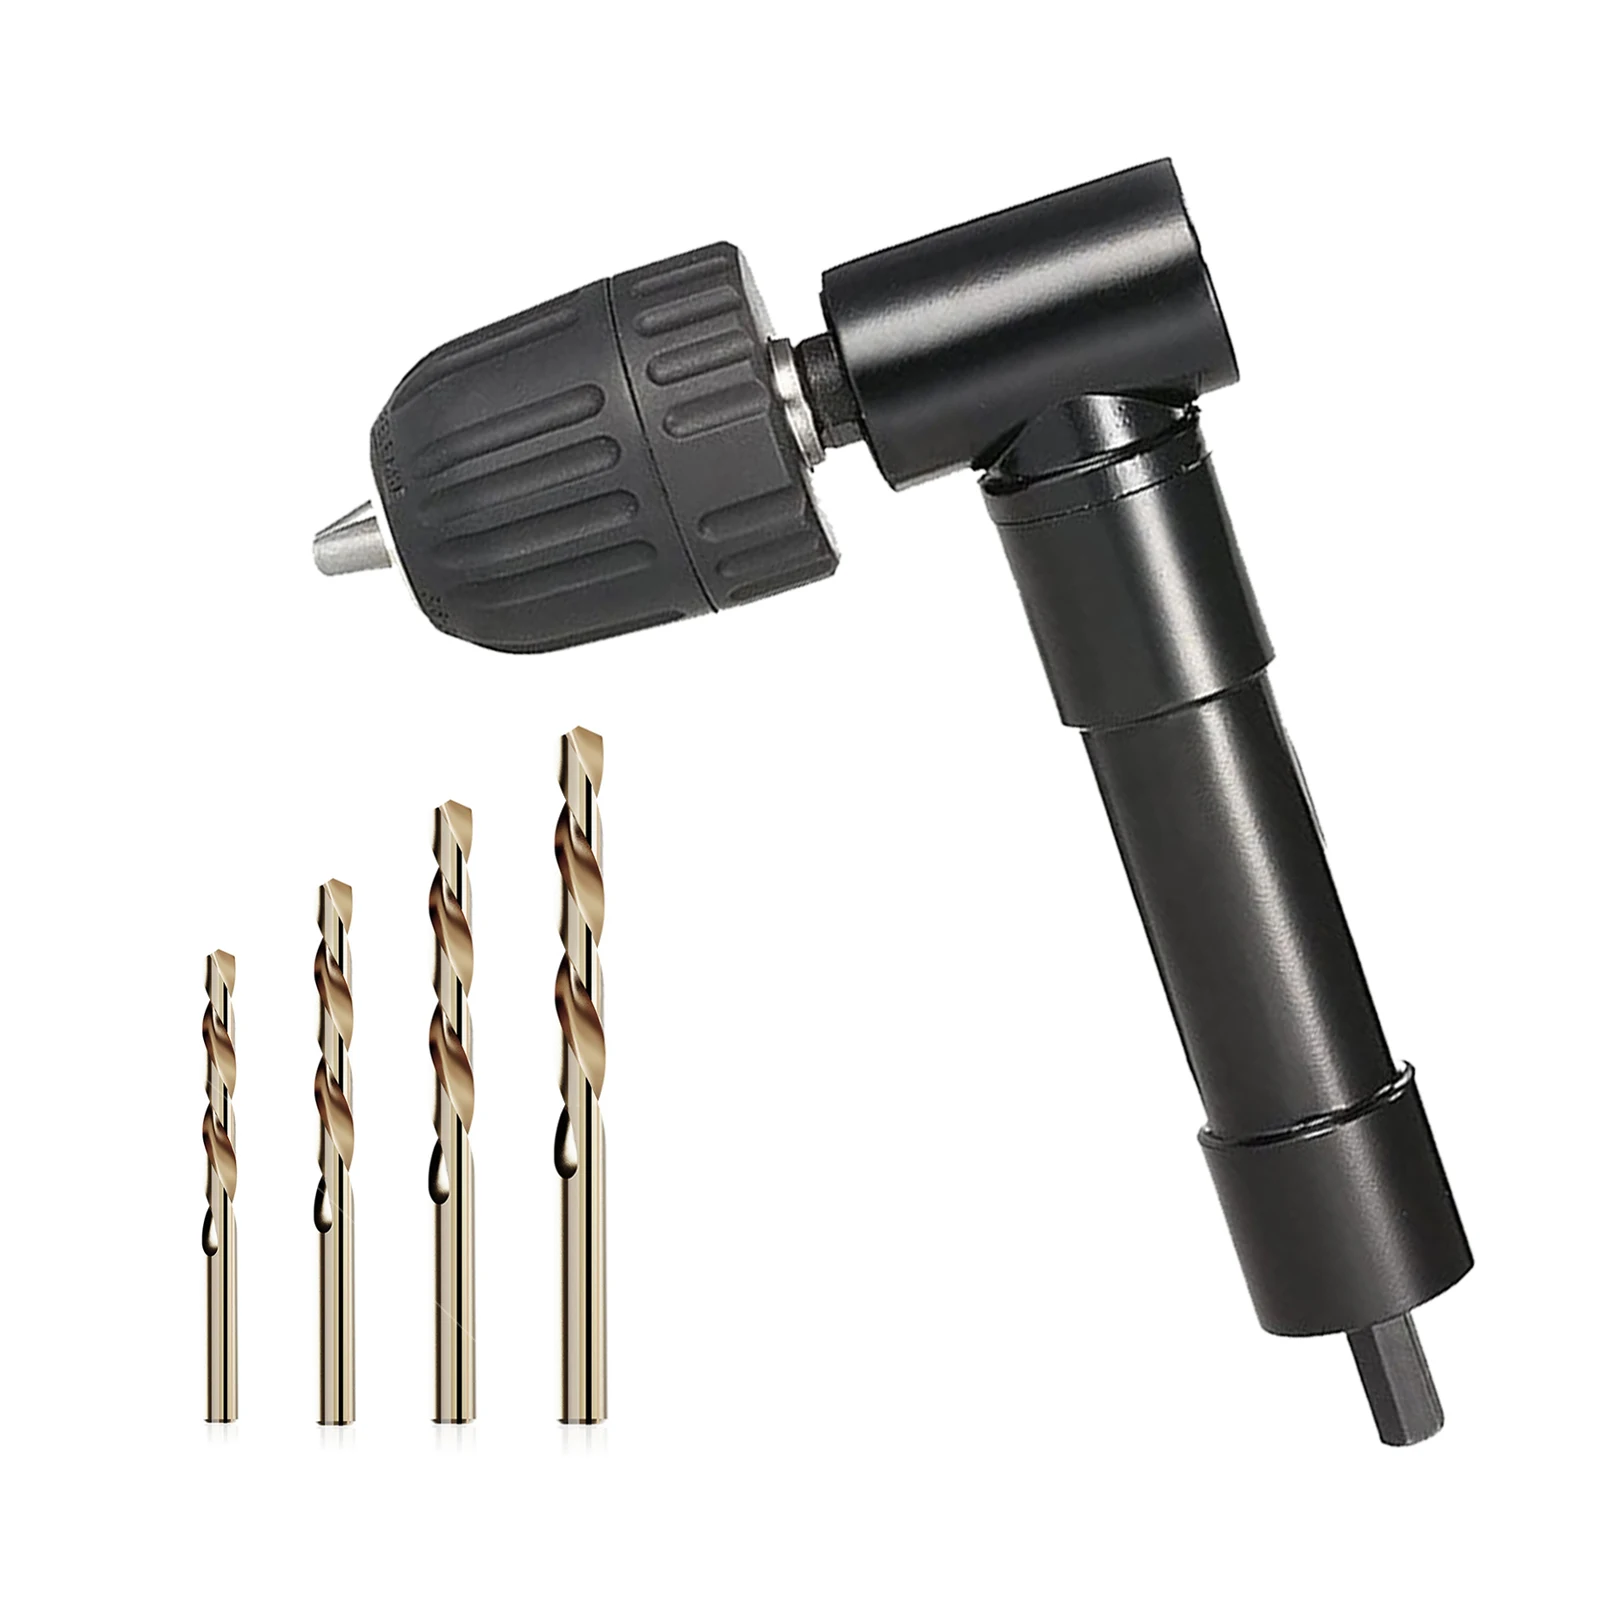 

Woodworking High Torque Corner Repair Universal Extension Hex Shank With 4 Bits 90 Degree Right Angle Drill Adapter 0.8 To 10mm